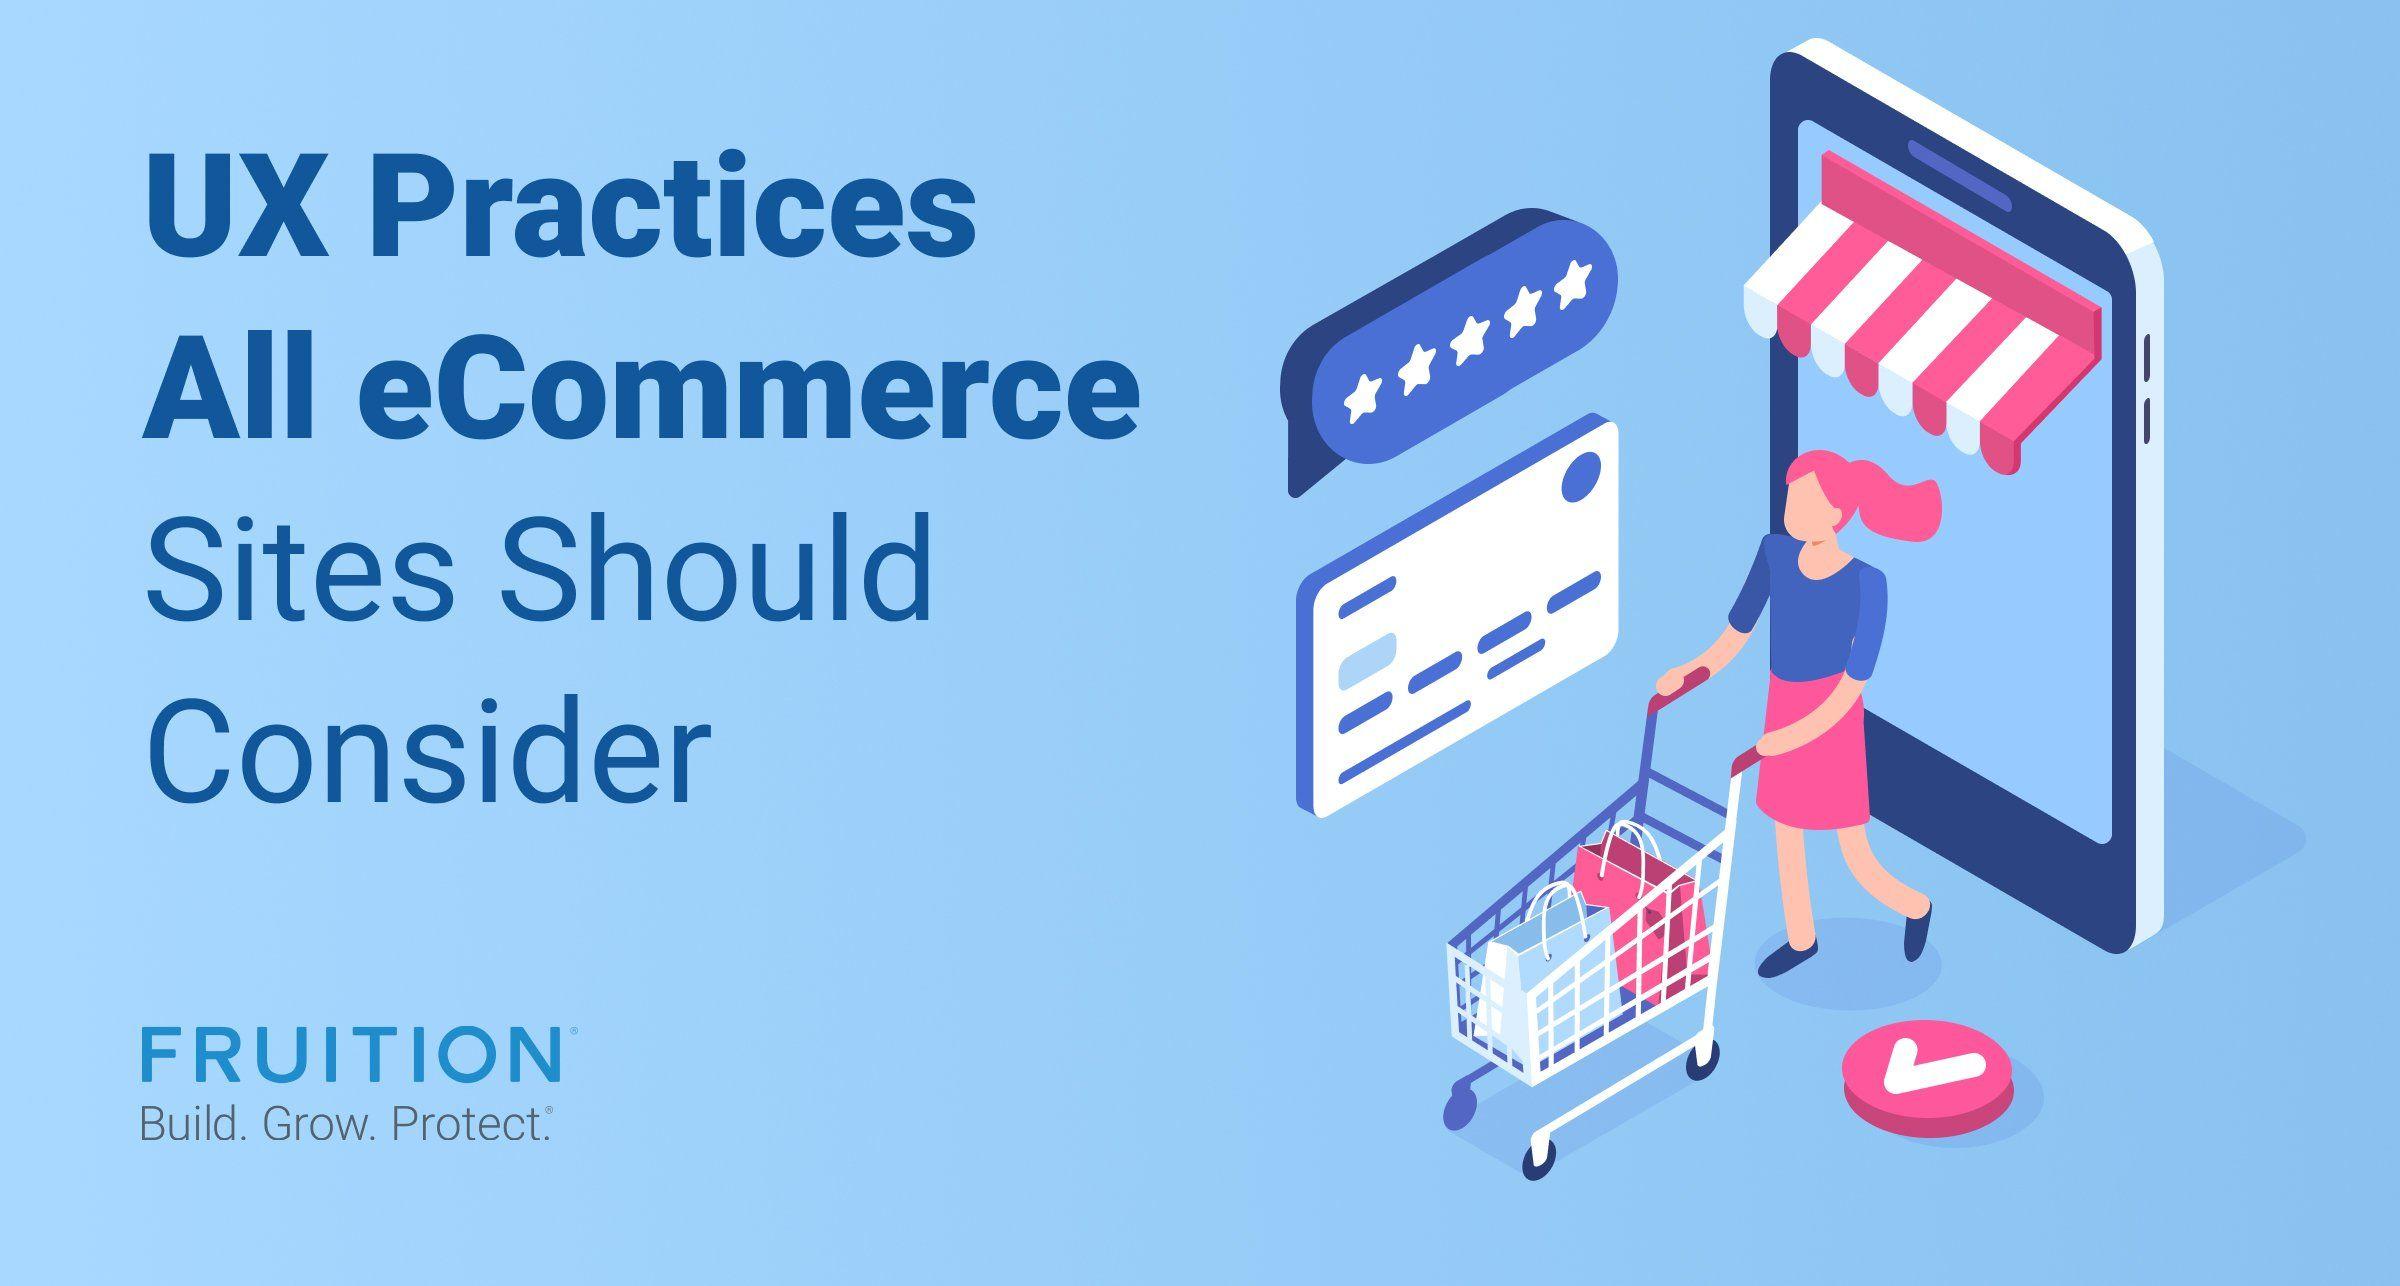 Discover actionable UX practices geared towards ecommerce sites to enhance user navigation, boost sales, and foster customer loyalty.